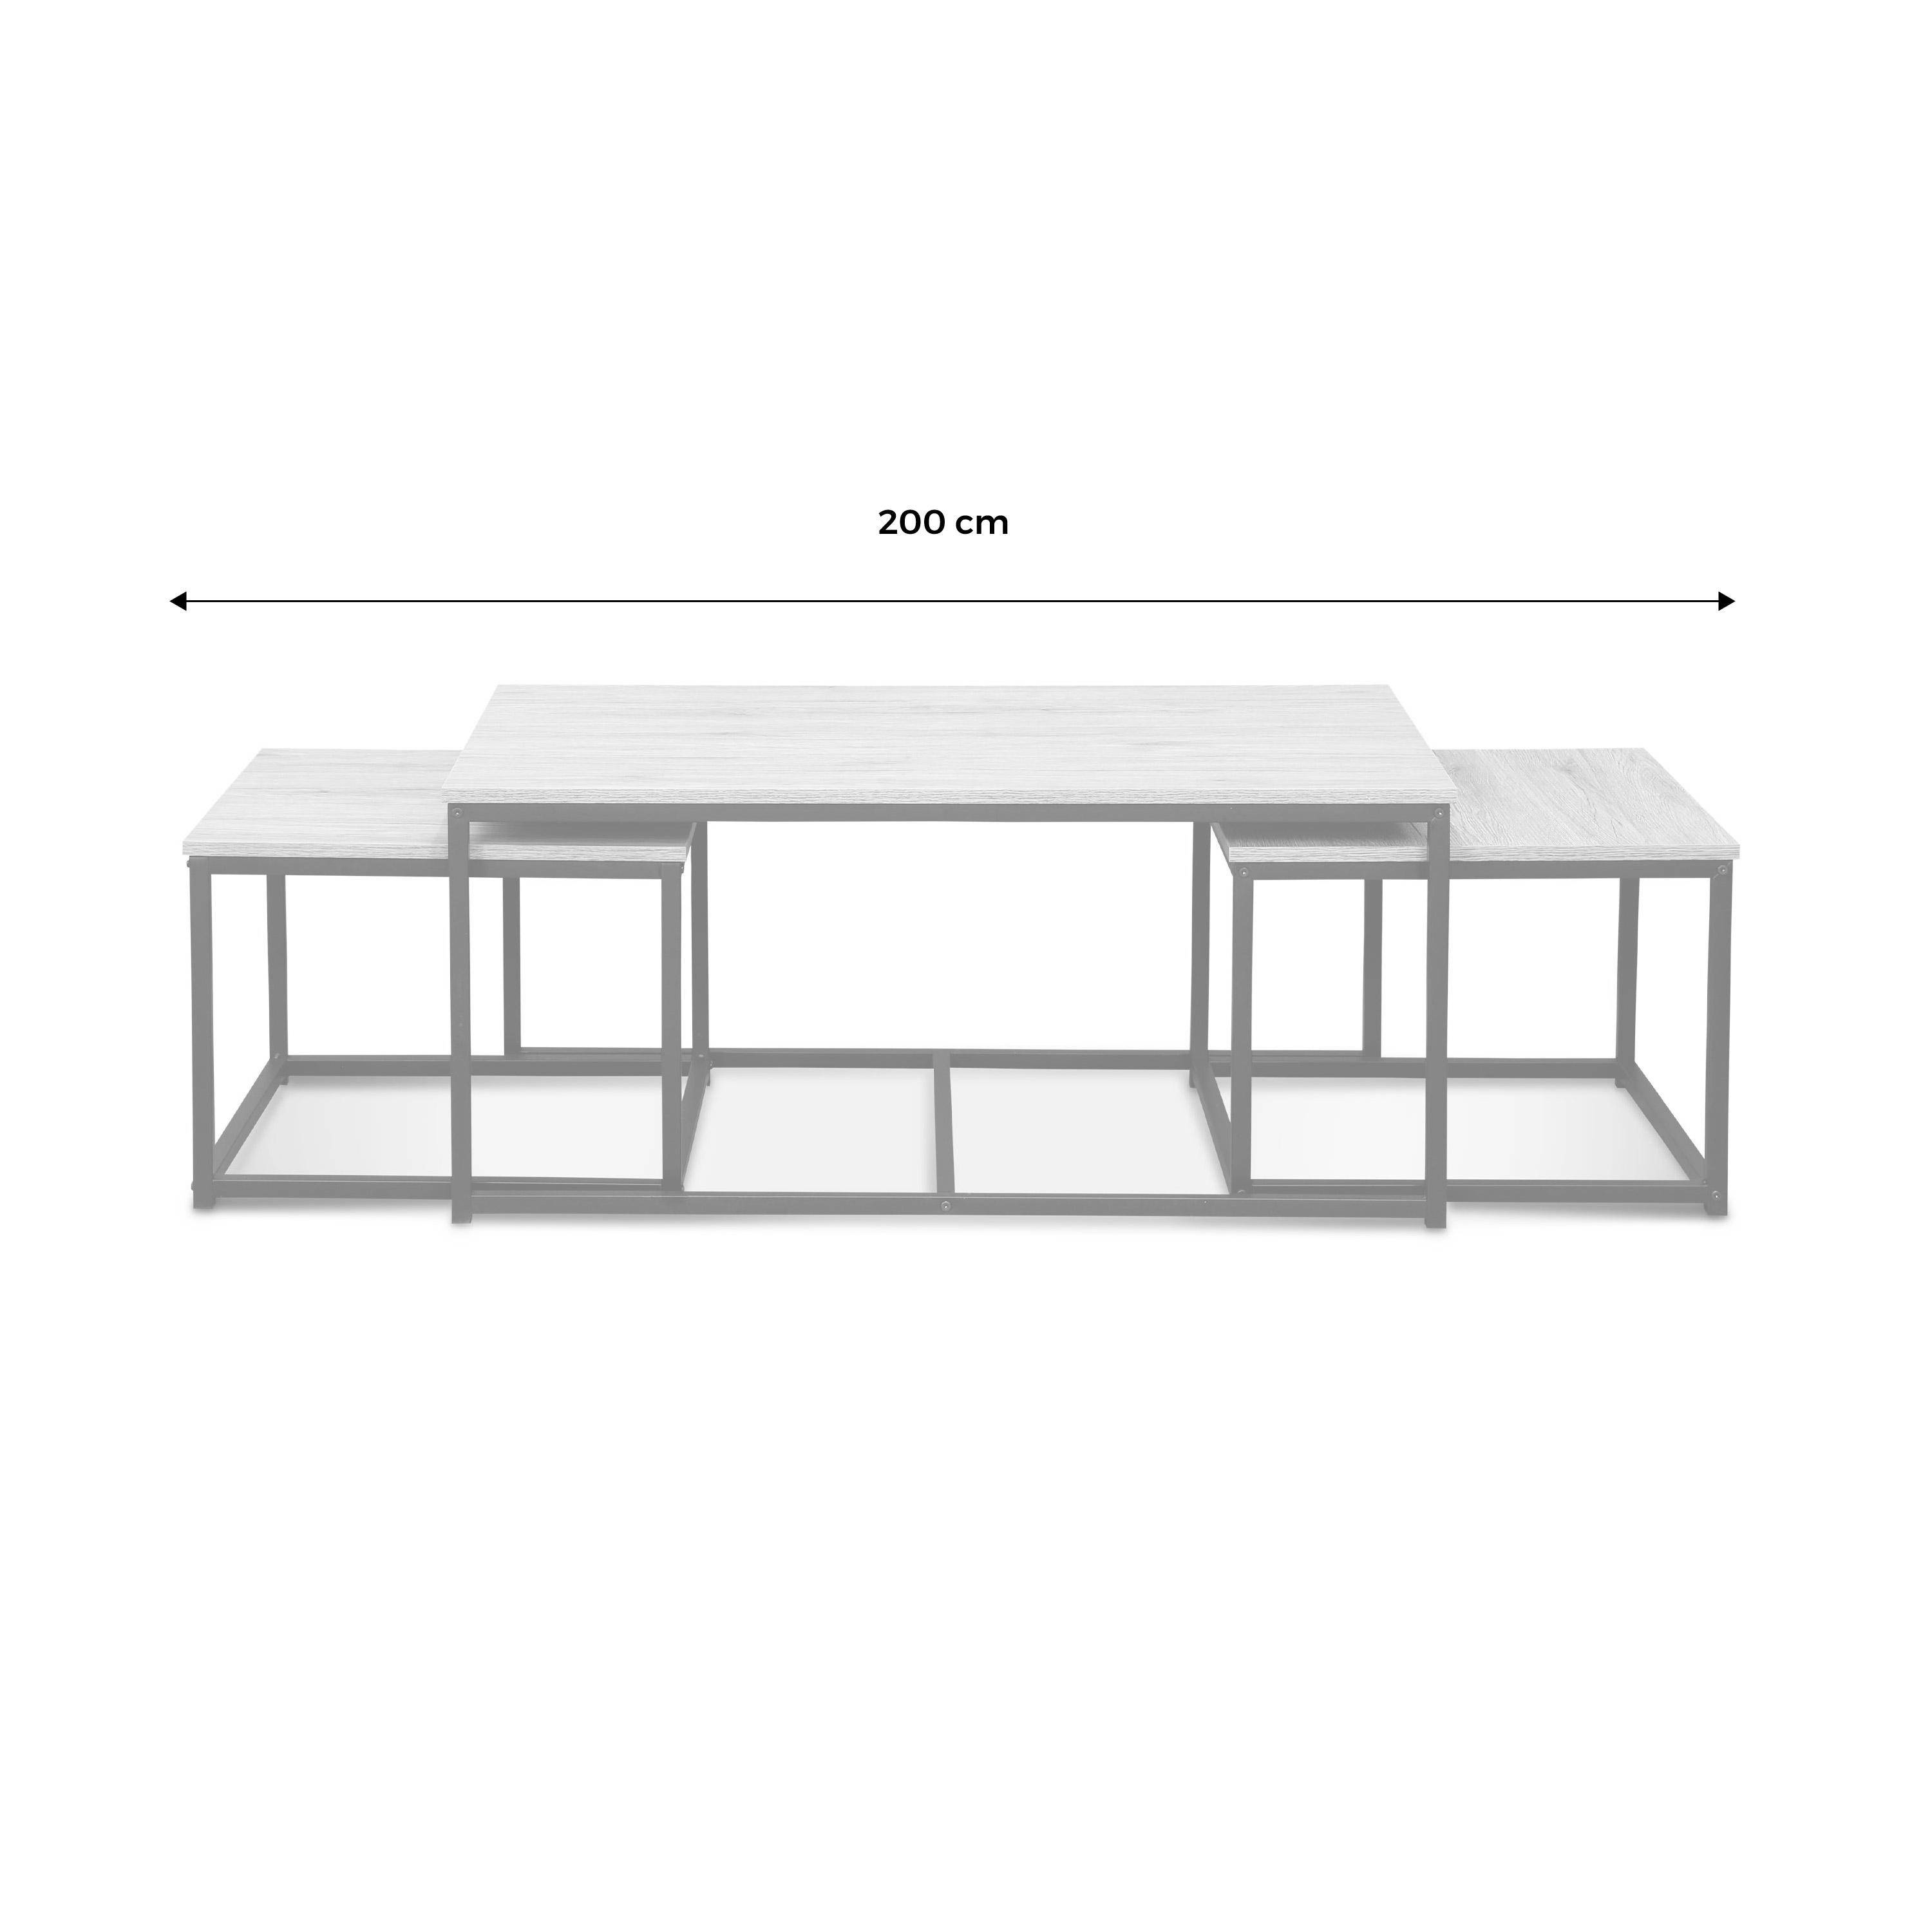 Set of 3 metal and wood-effect nesting tables, large table 100x60x45cm, 2x small tables 50x50x38cm - Loft - Black Photo9